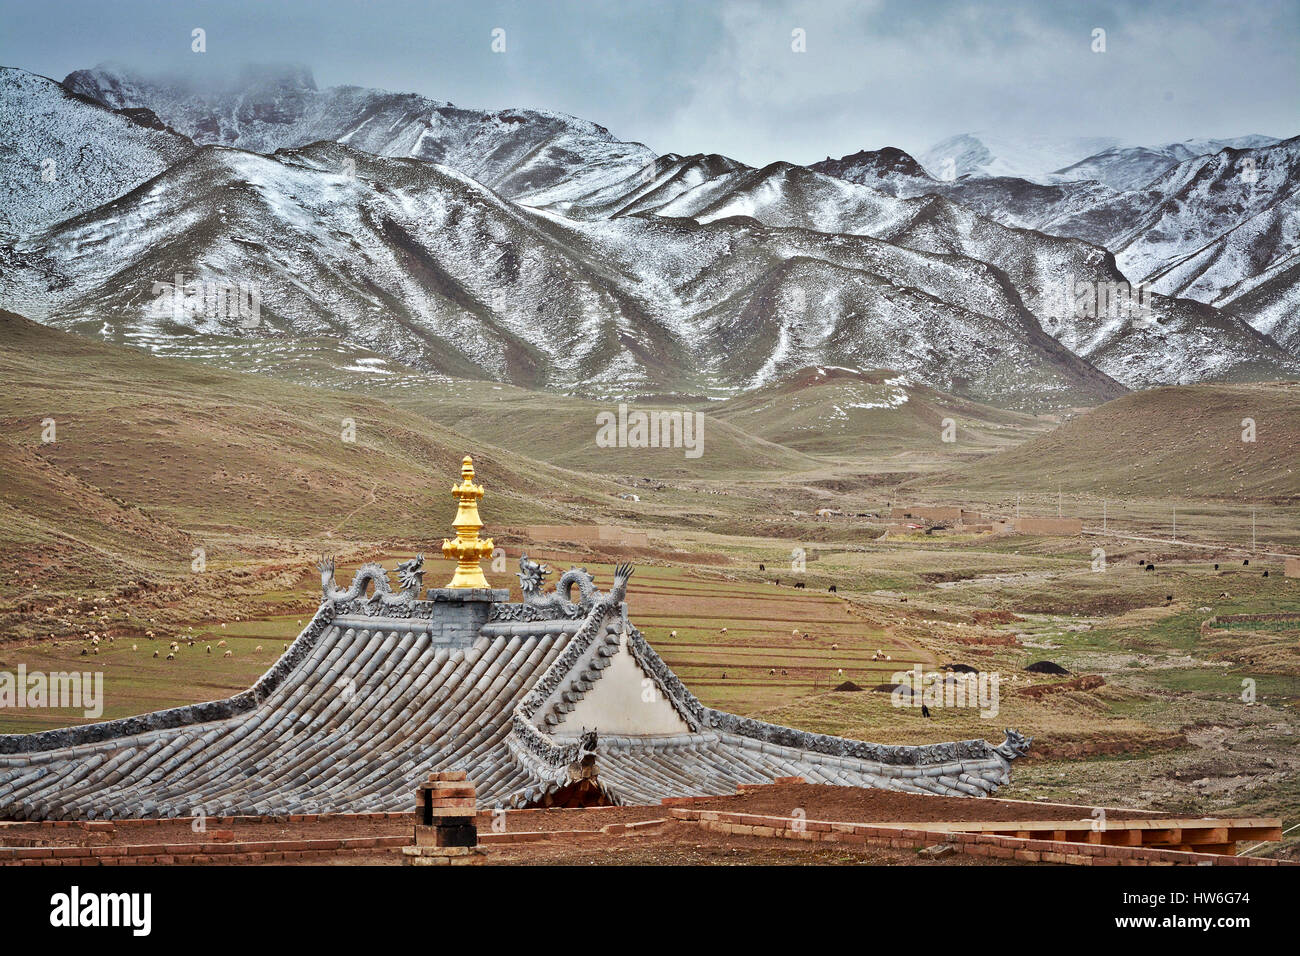 The Grasslands Of Gansu Province in China With The Roof Of Tseway Monastery In The Foreground Stock Photo